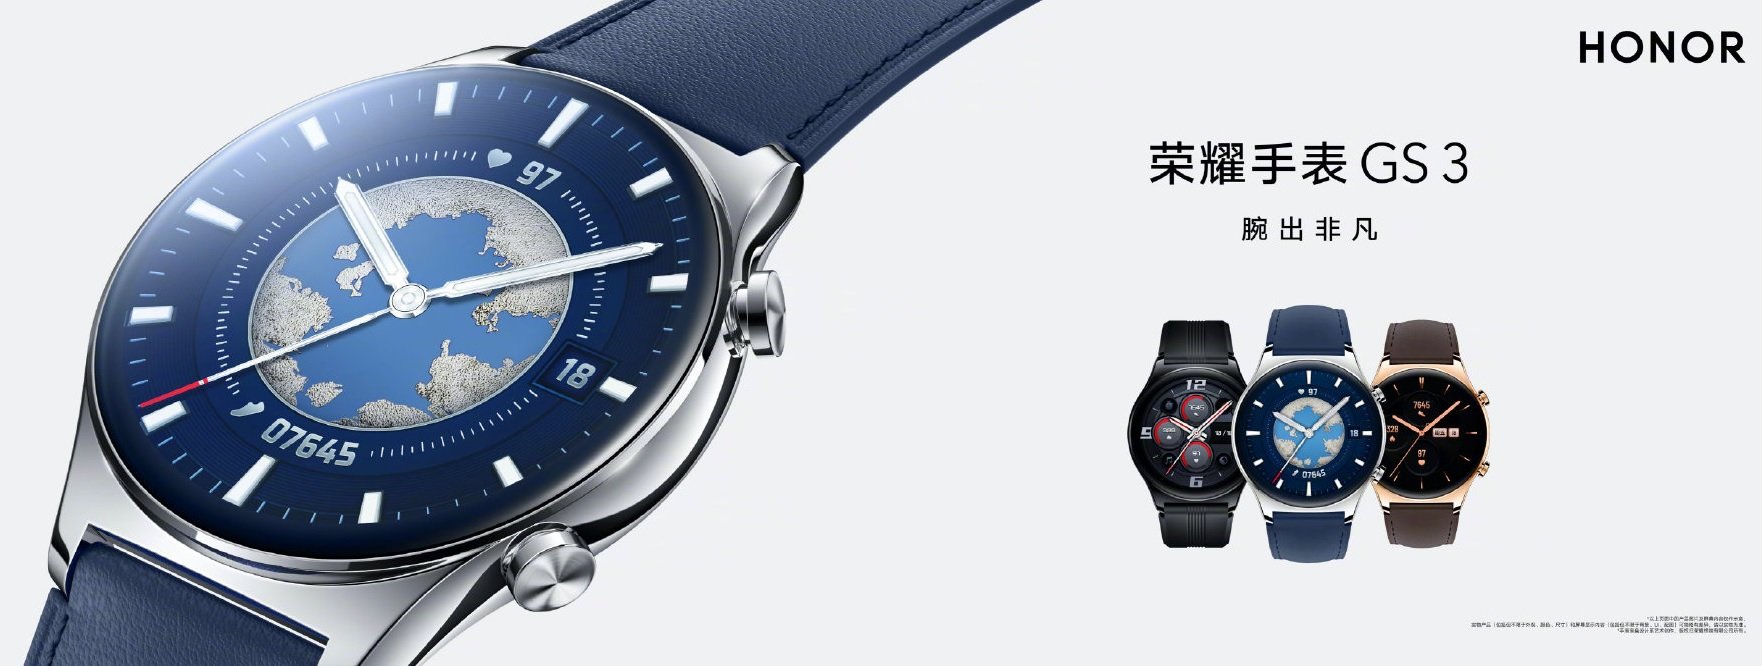  Honor Watch GS 3